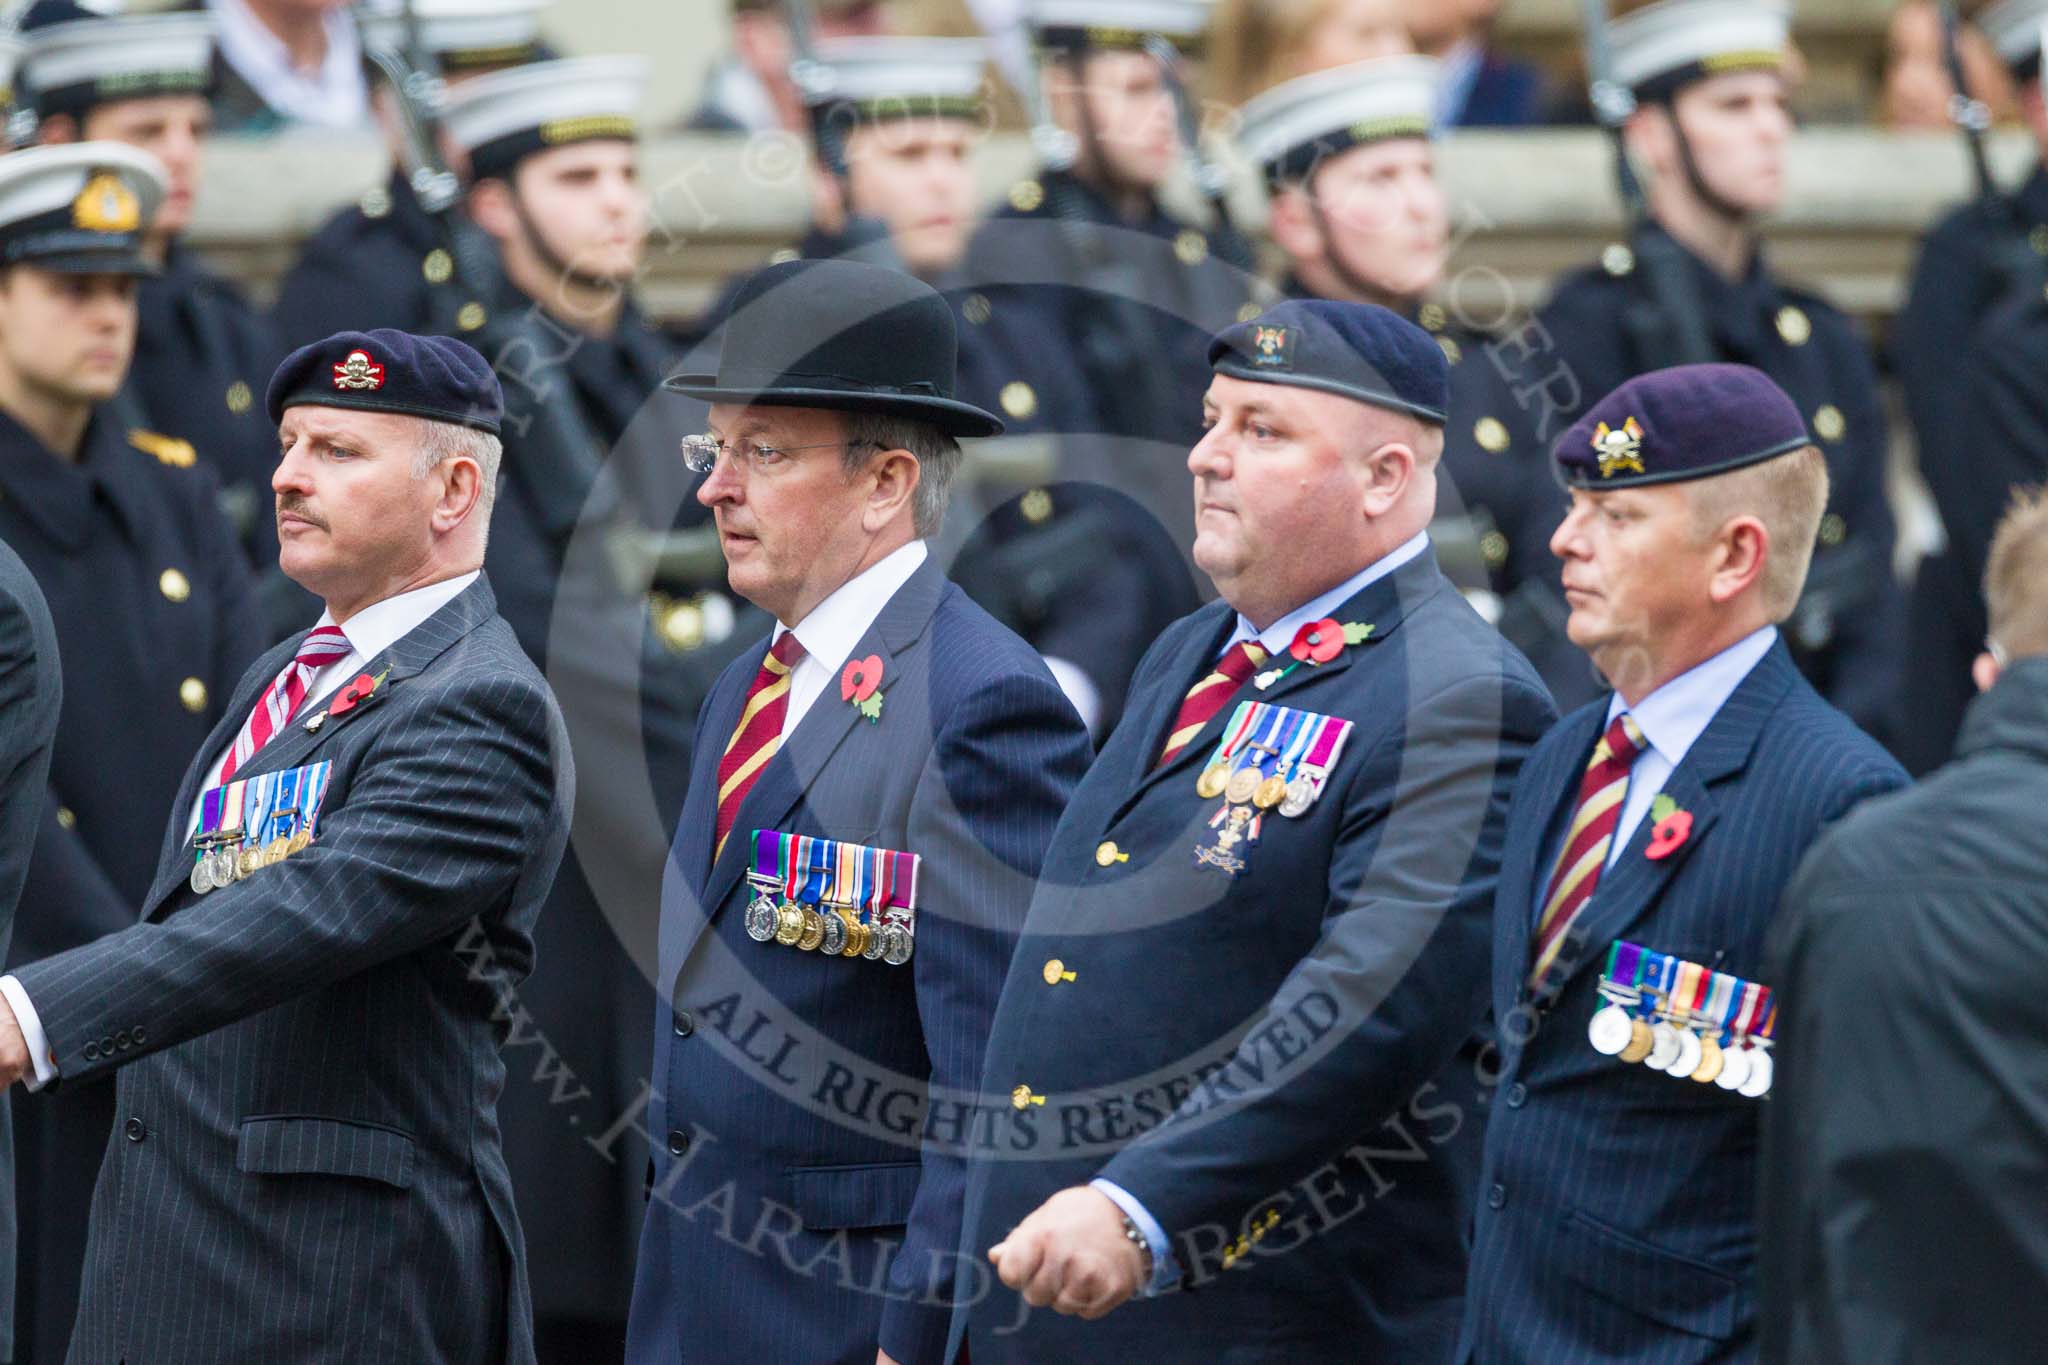 Remembrance Sunday at the Cenotaph 2015: Group B28, The Royal Lancers (New for 2015).
Cenotaph, Whitehall, London SW1,
London,
Greater London,
United Kingdom,
on 08 November 2015 at 11:42, image #223